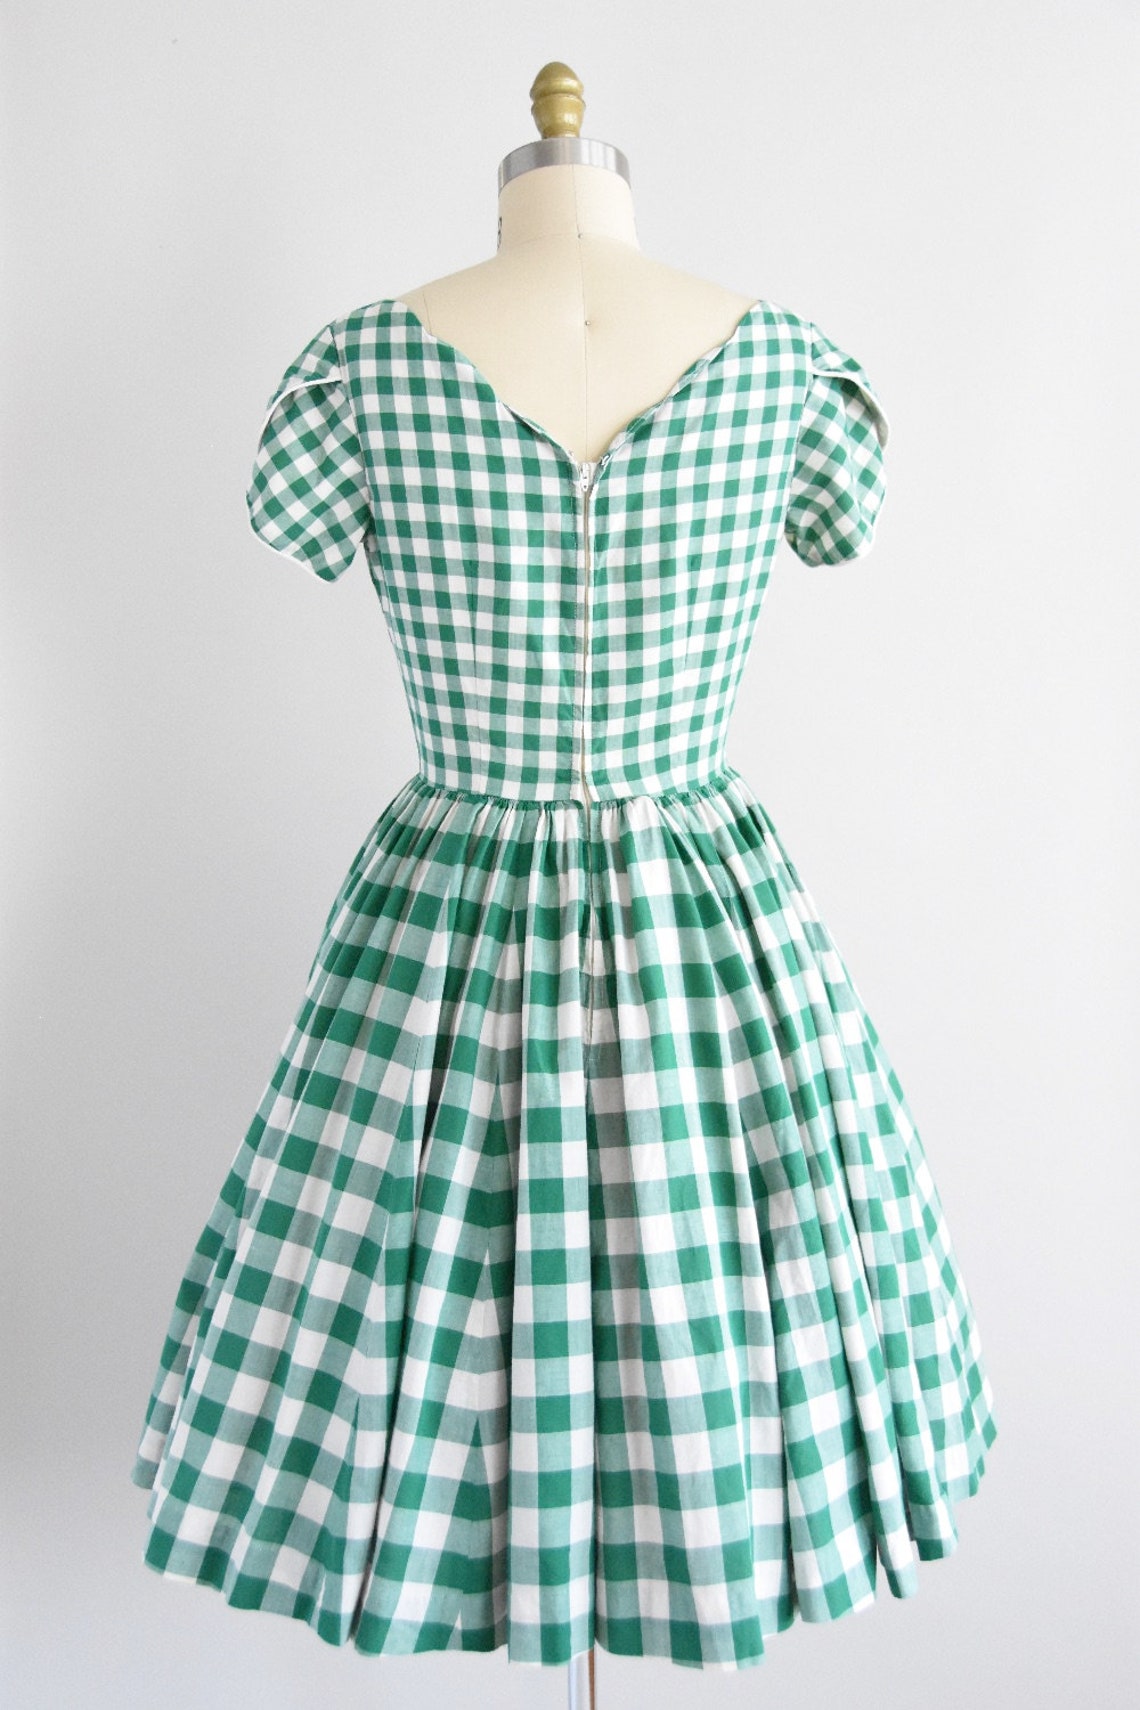 Buy 1950s Have A Picnic Dress Online in India - Etsy